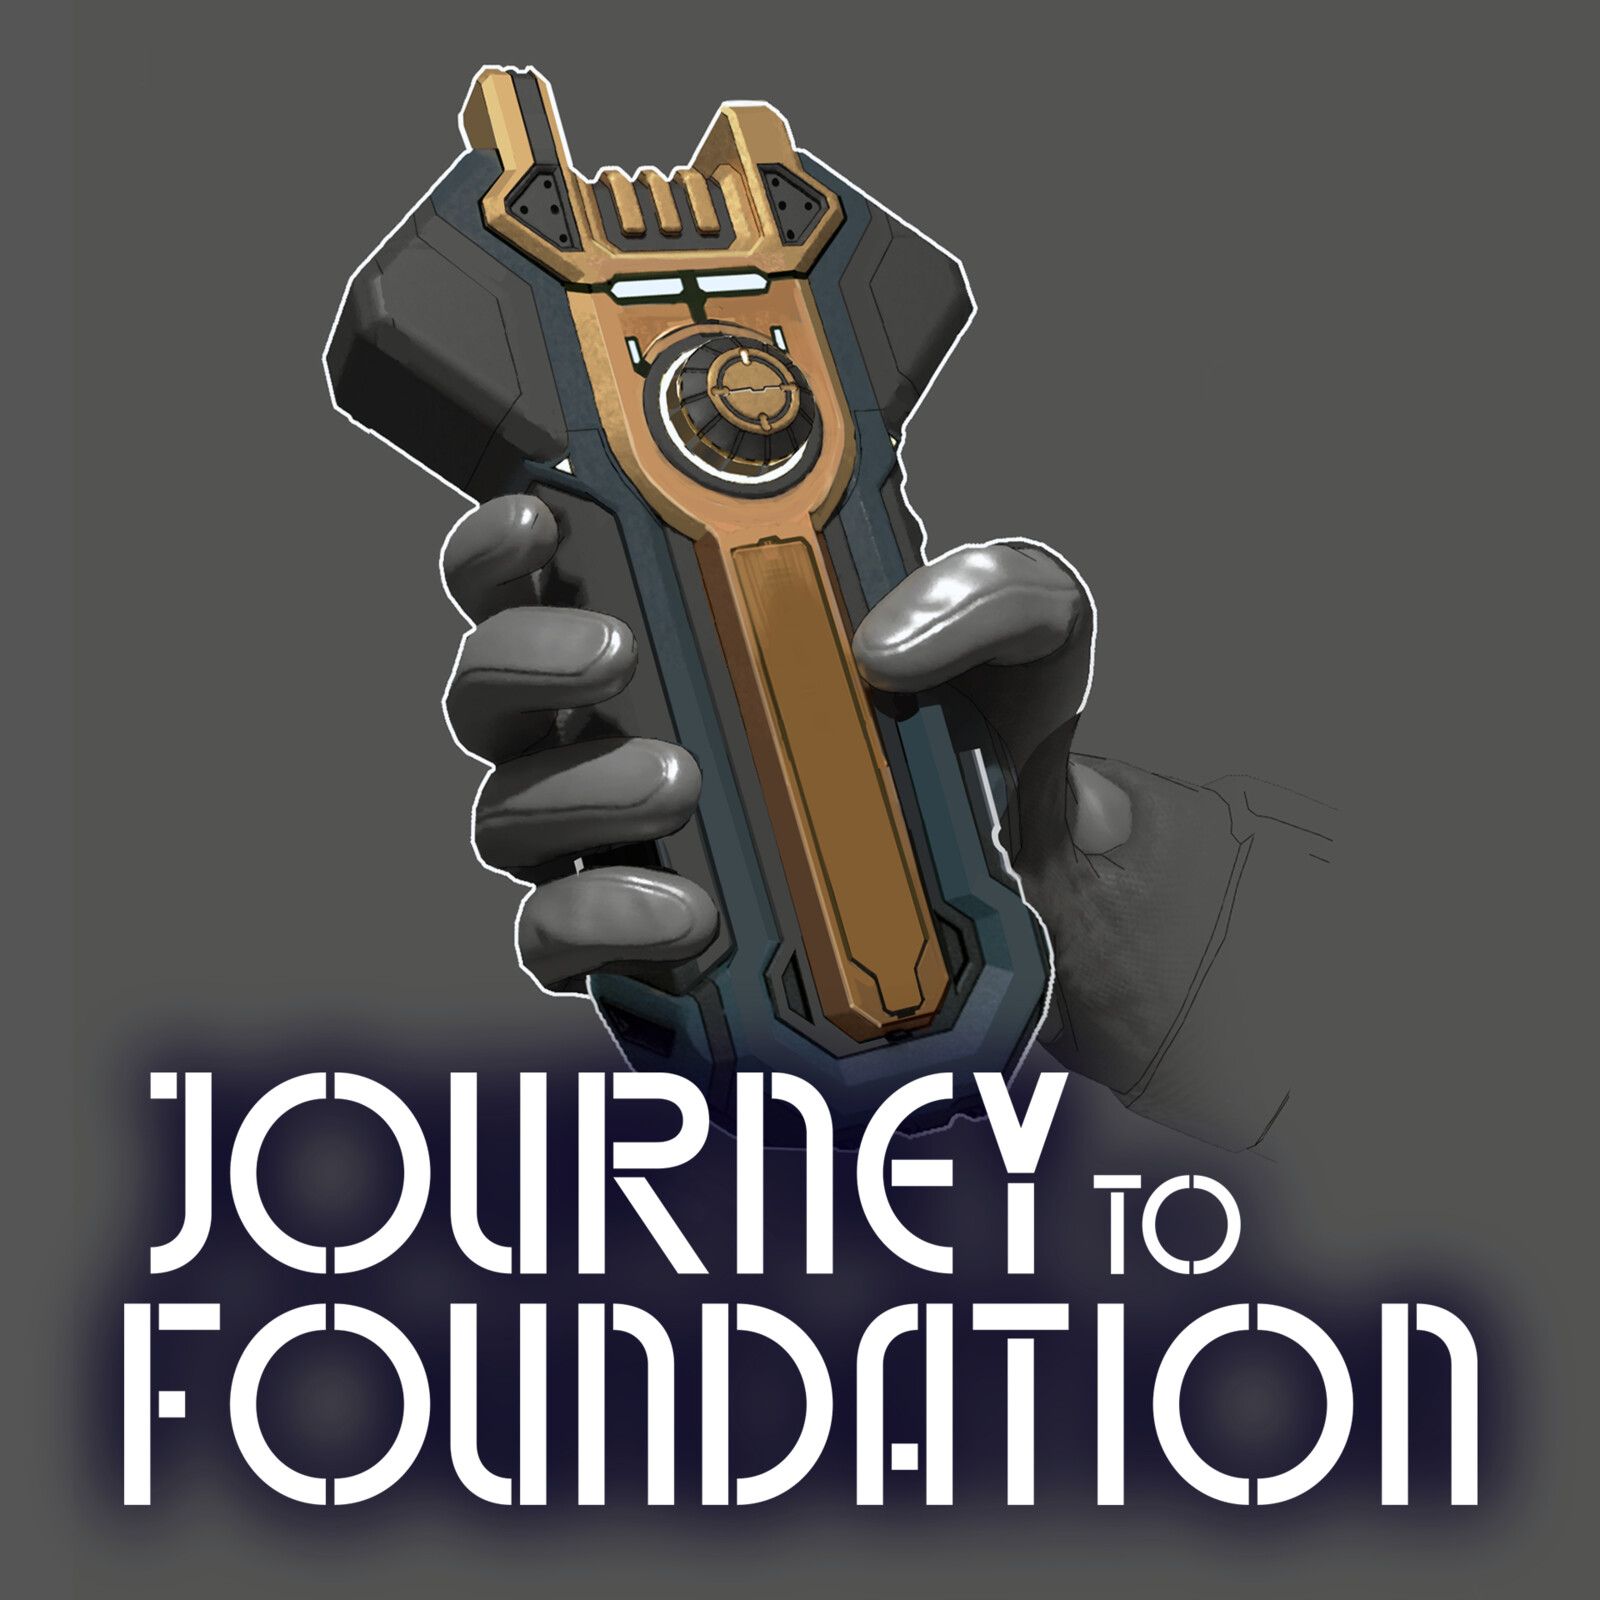 Journey to Foundation: Audio Log Device Concept